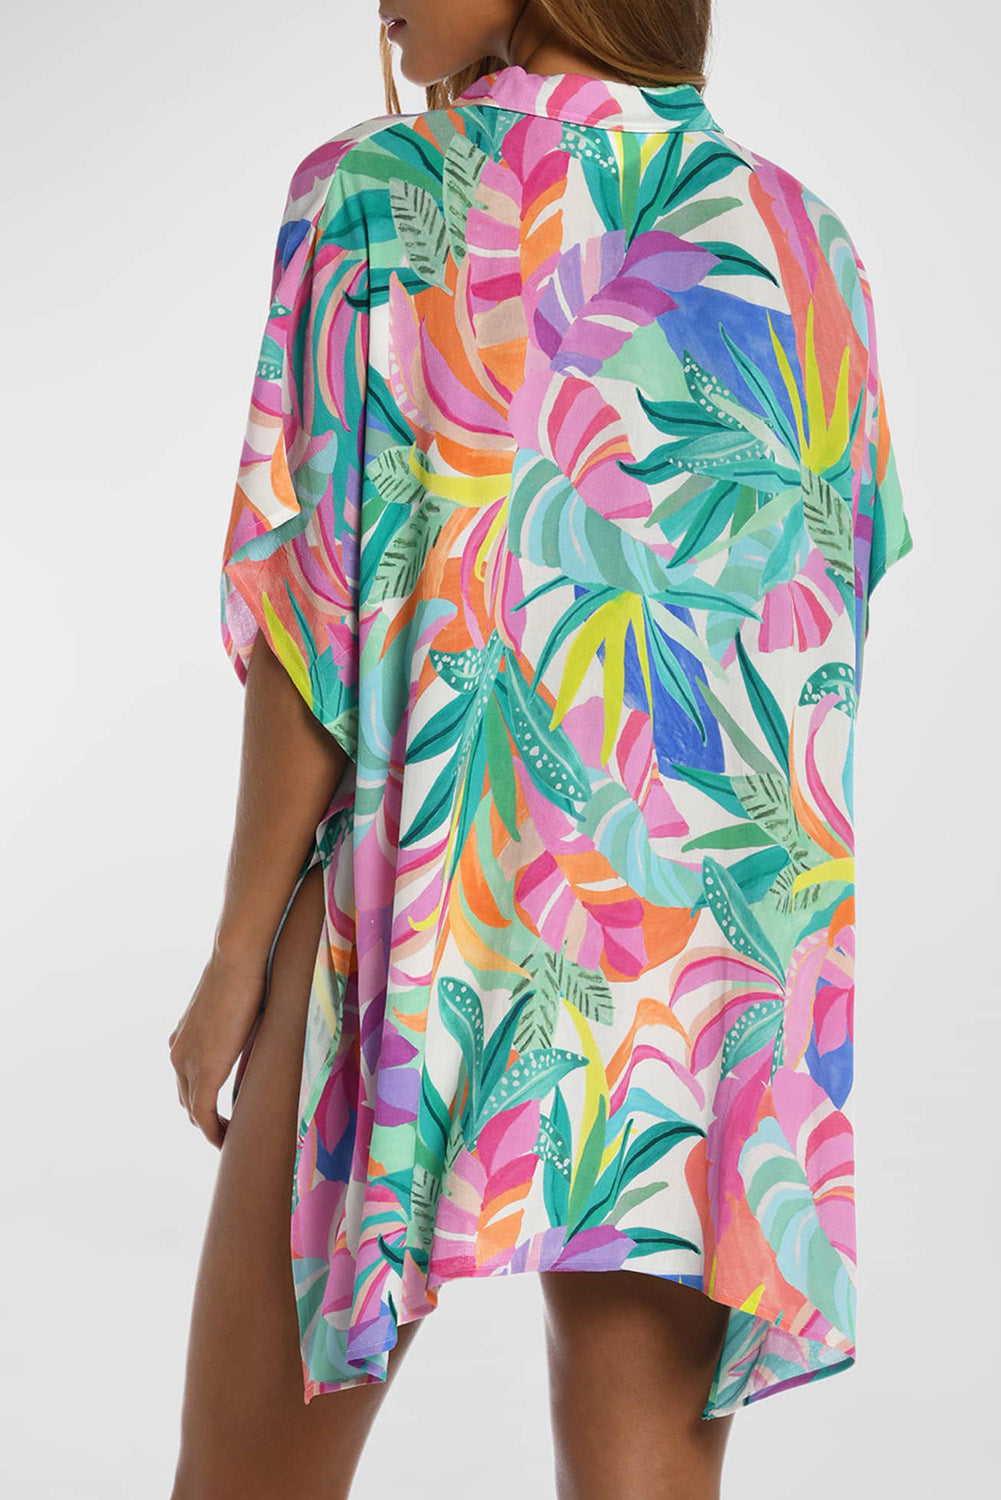 Multicolor Tropical Print Button-up Short Sleeve Beach Cover Up